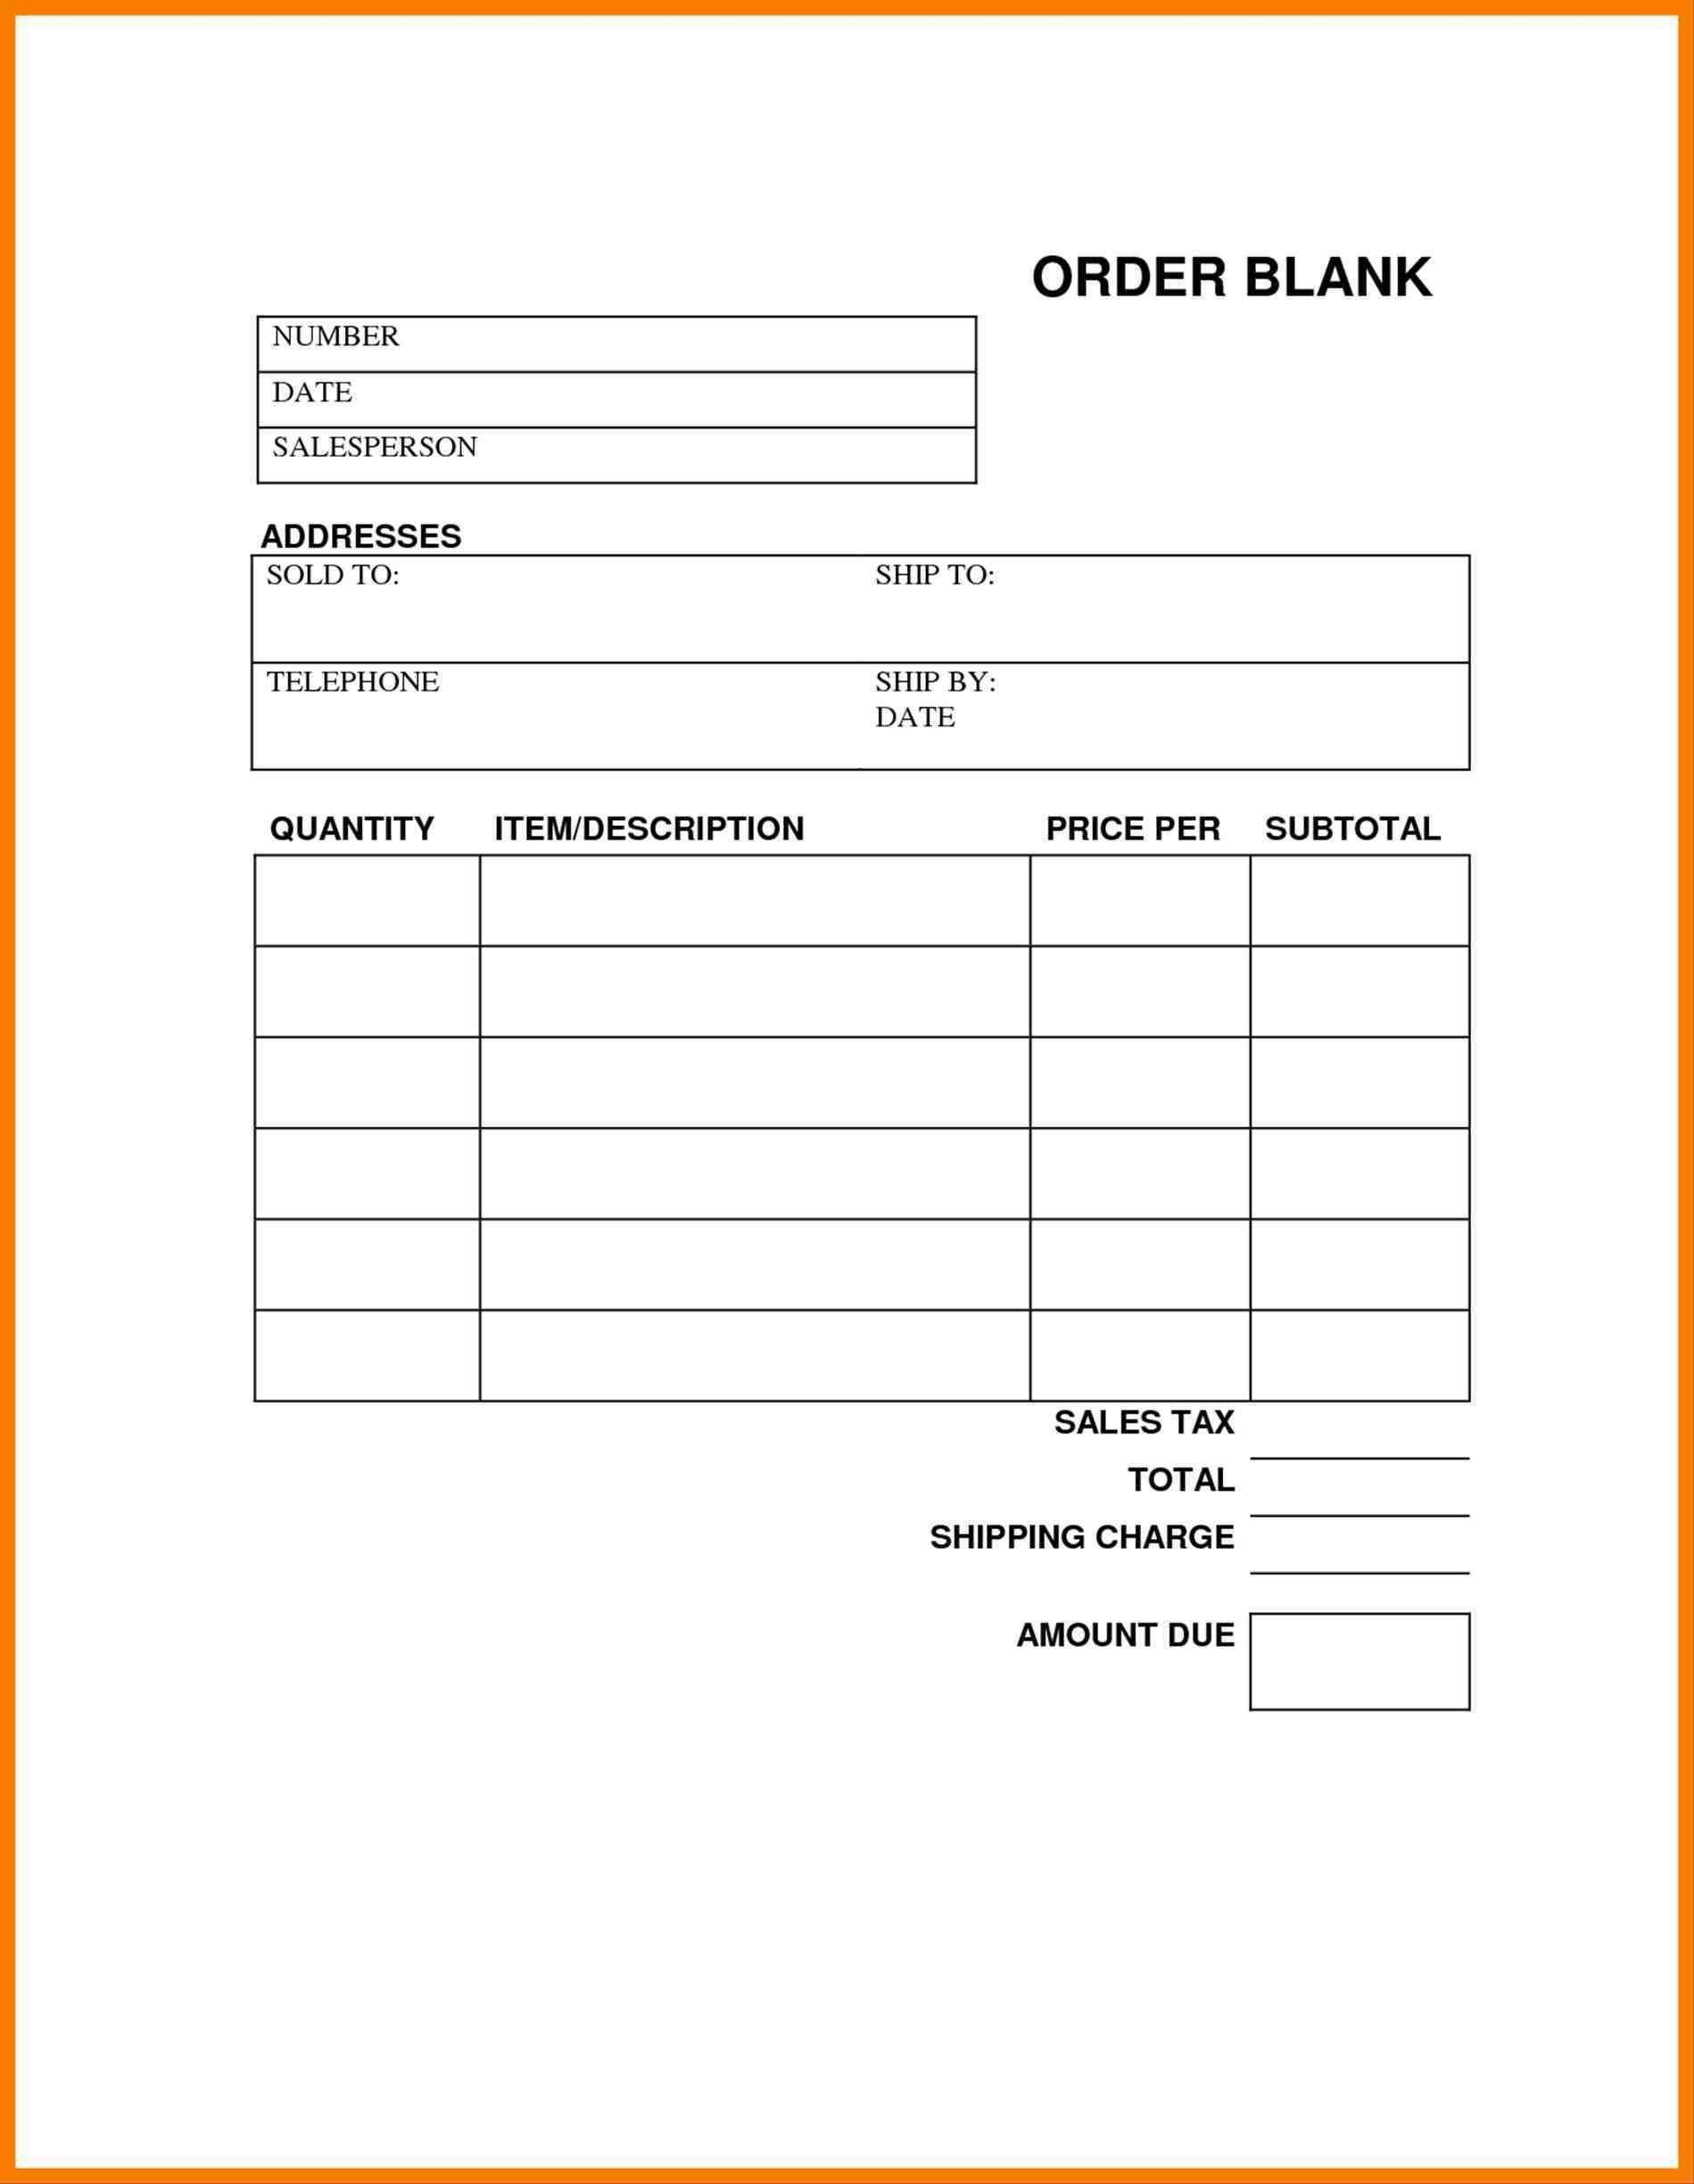 Blank Order Forms Templates Free | Free Tamplate | Order Form - Free Printable Order Forms